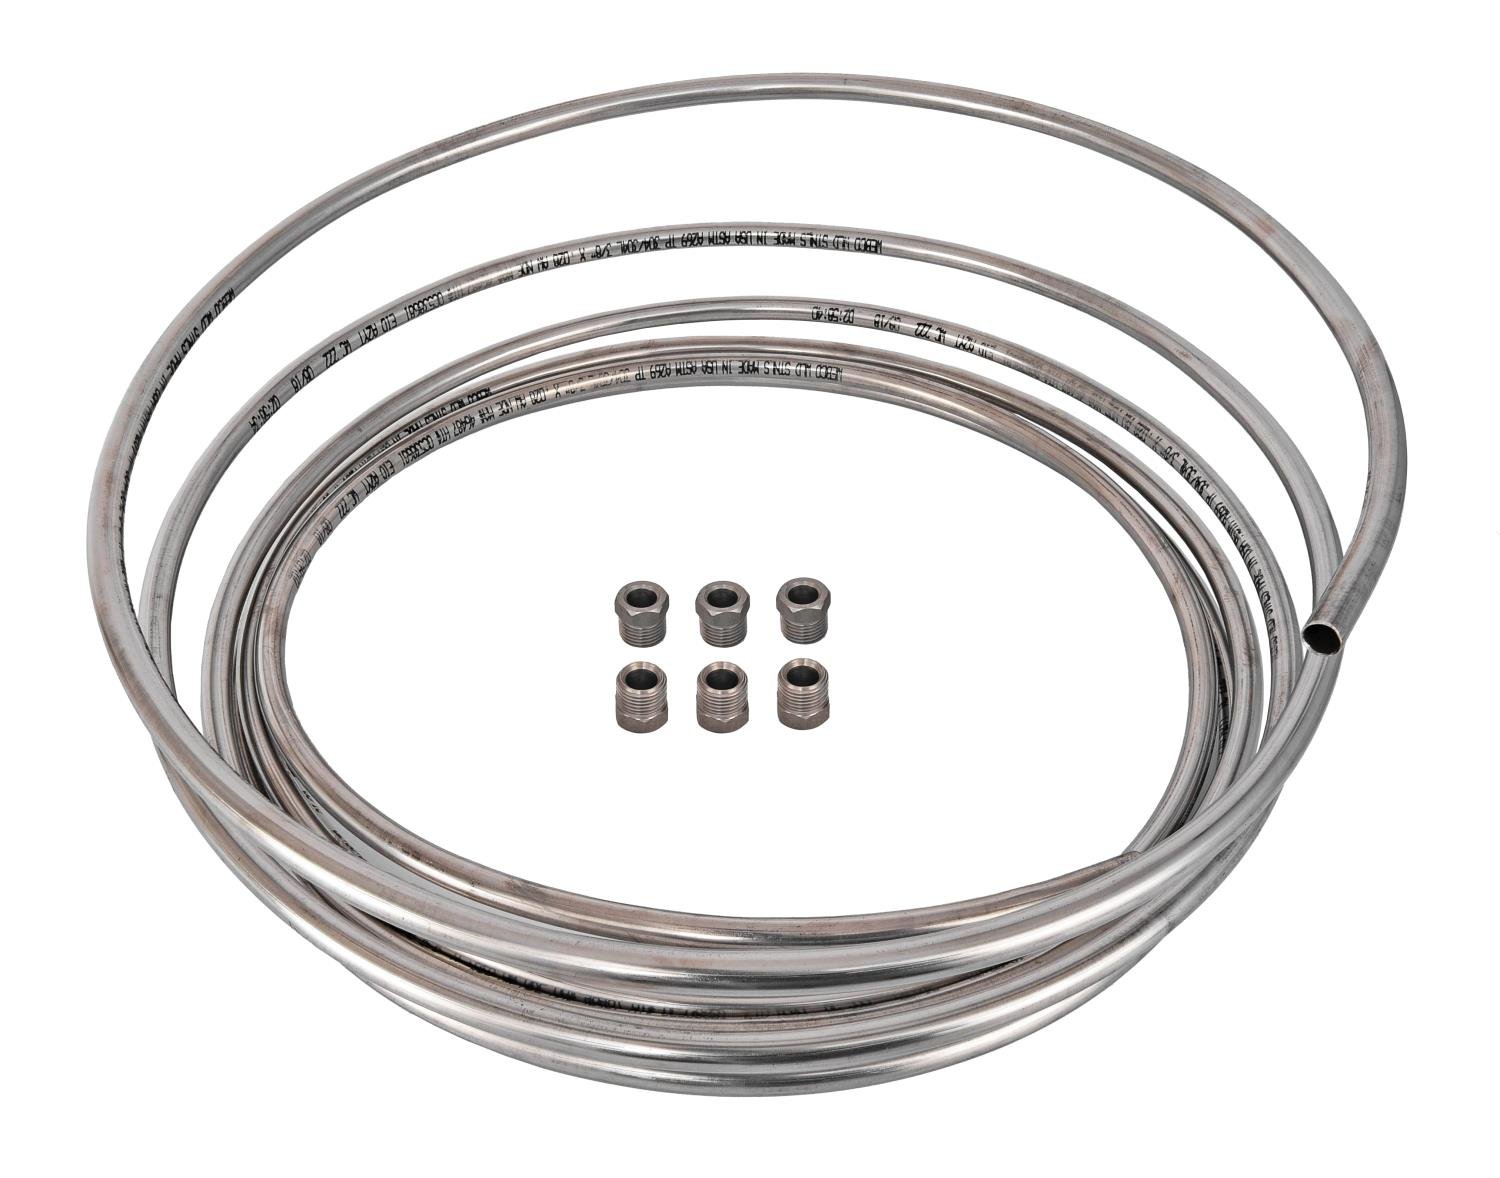 JEGS Stainless Steel Fuel Line Coil Kit, 3/8 in. O.D. x .028 in. Wall